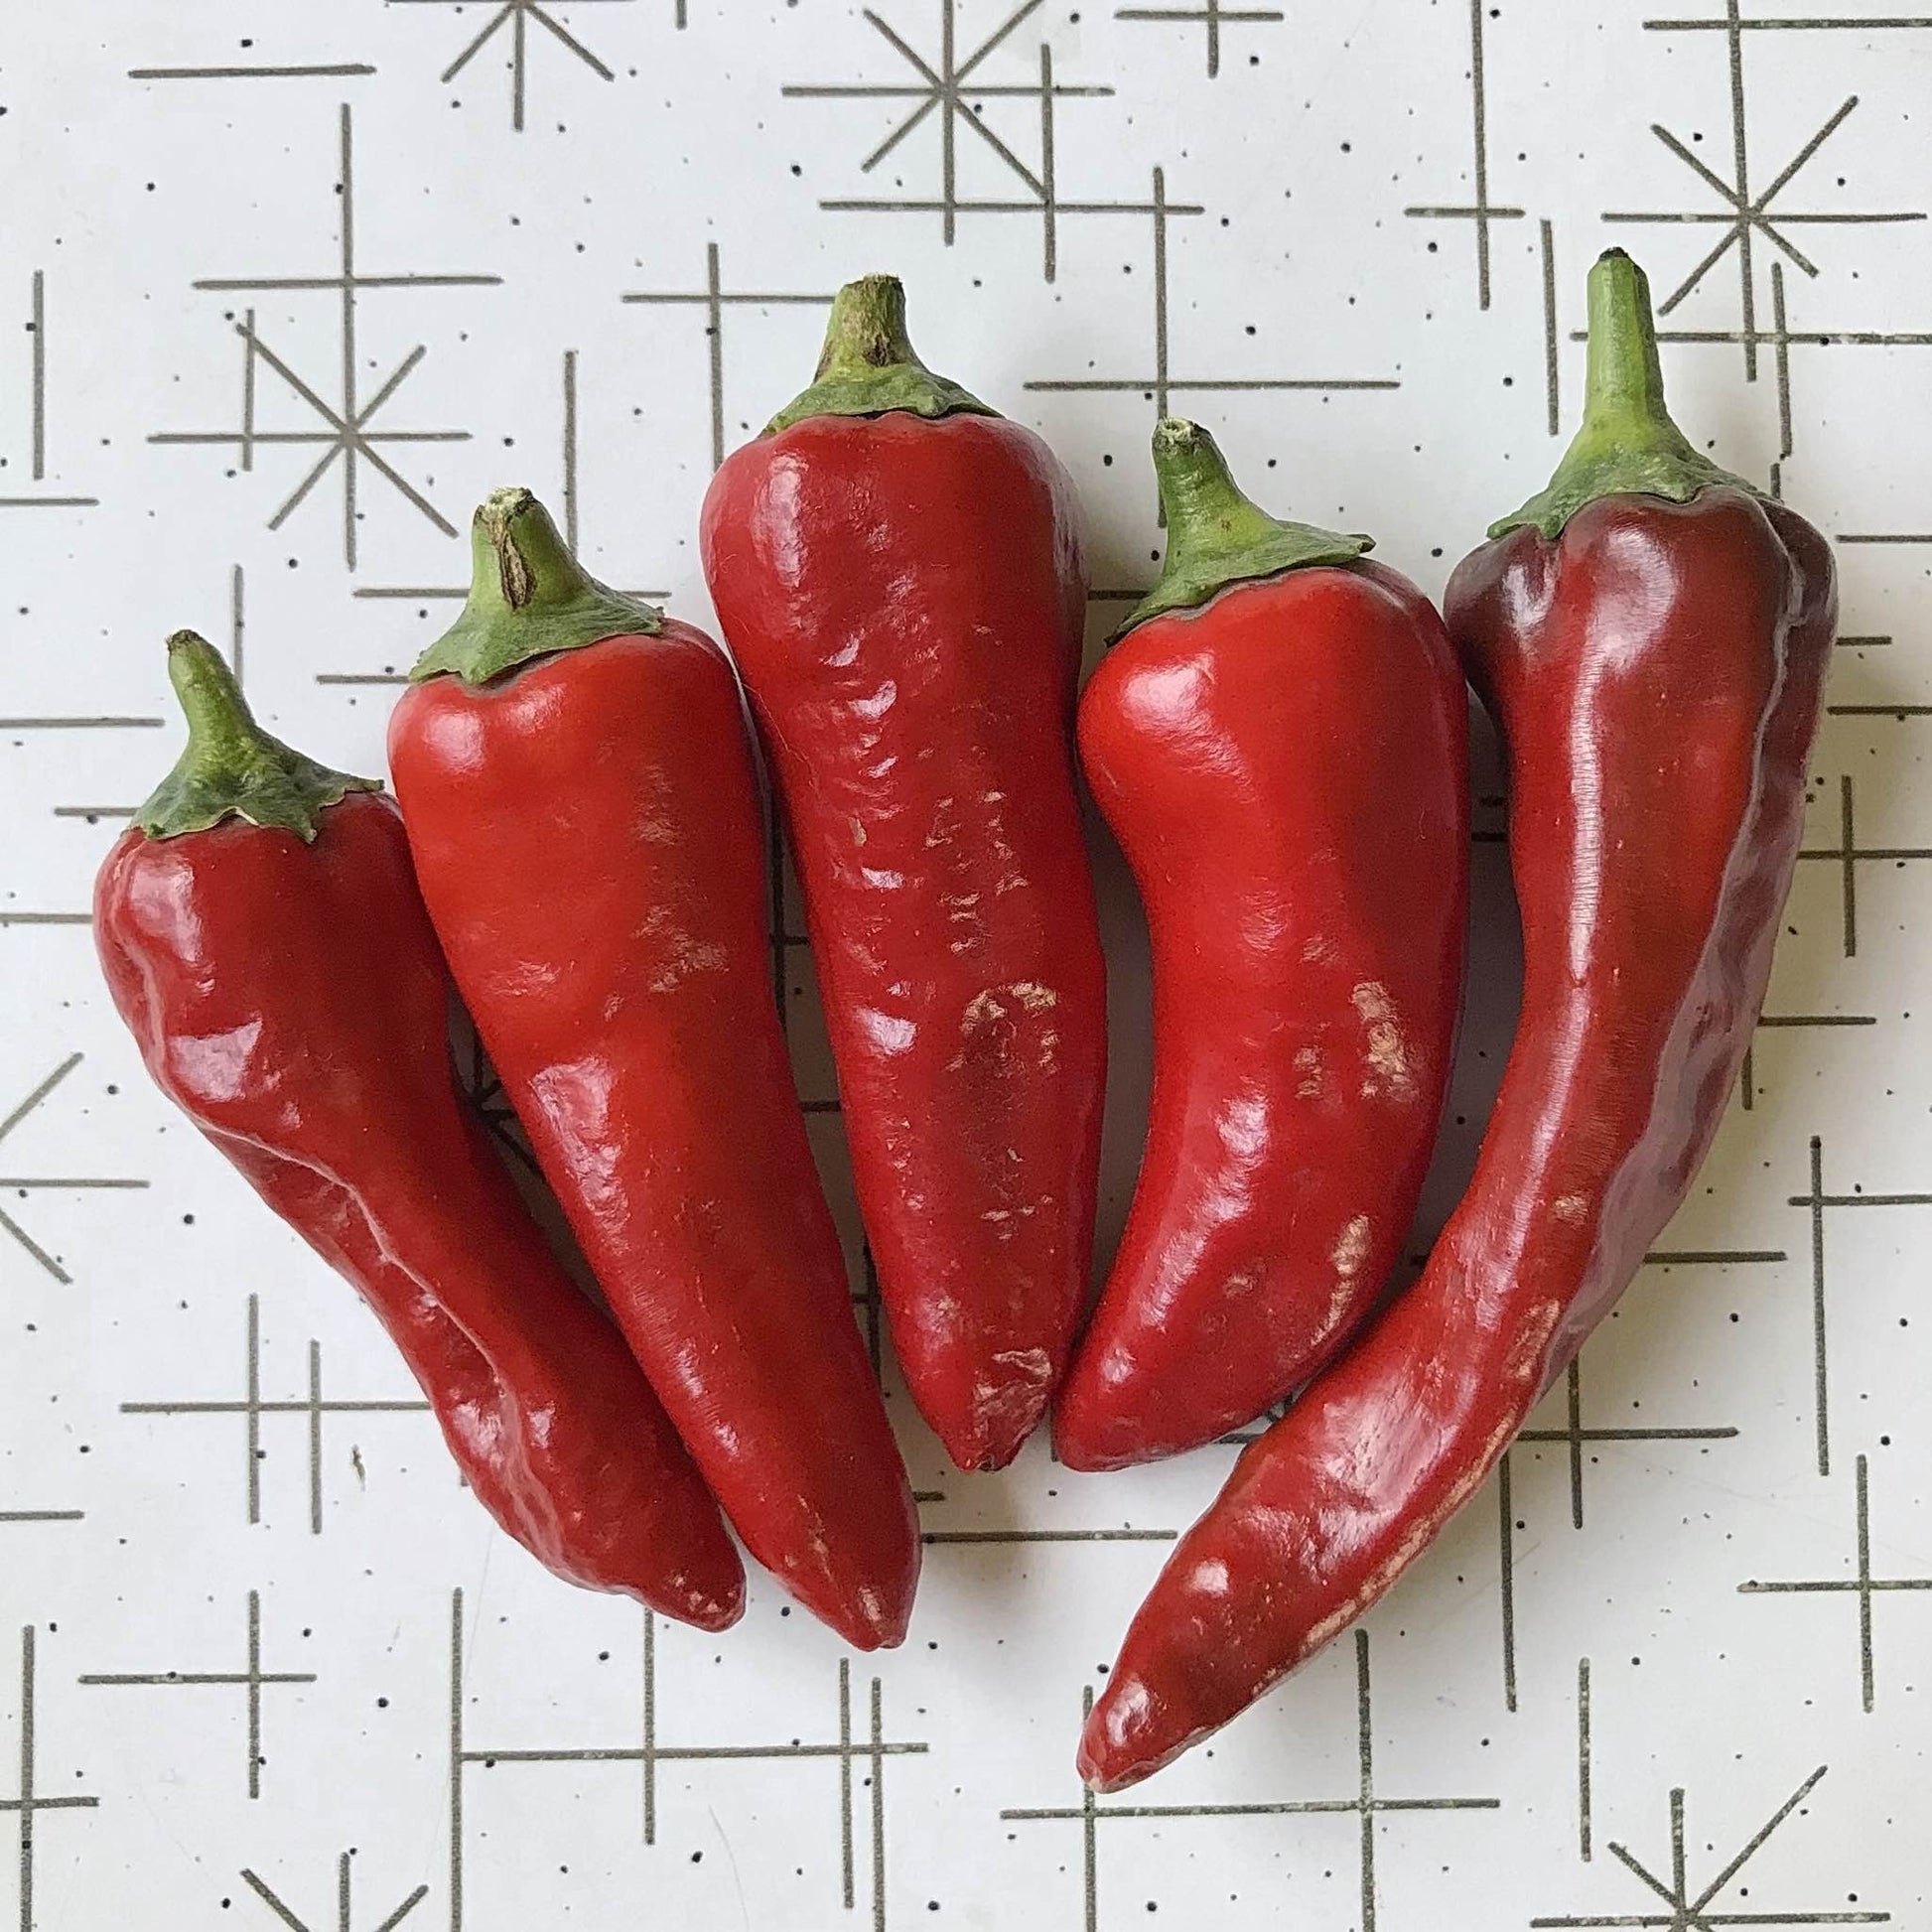 pointy chimayo chile peppers